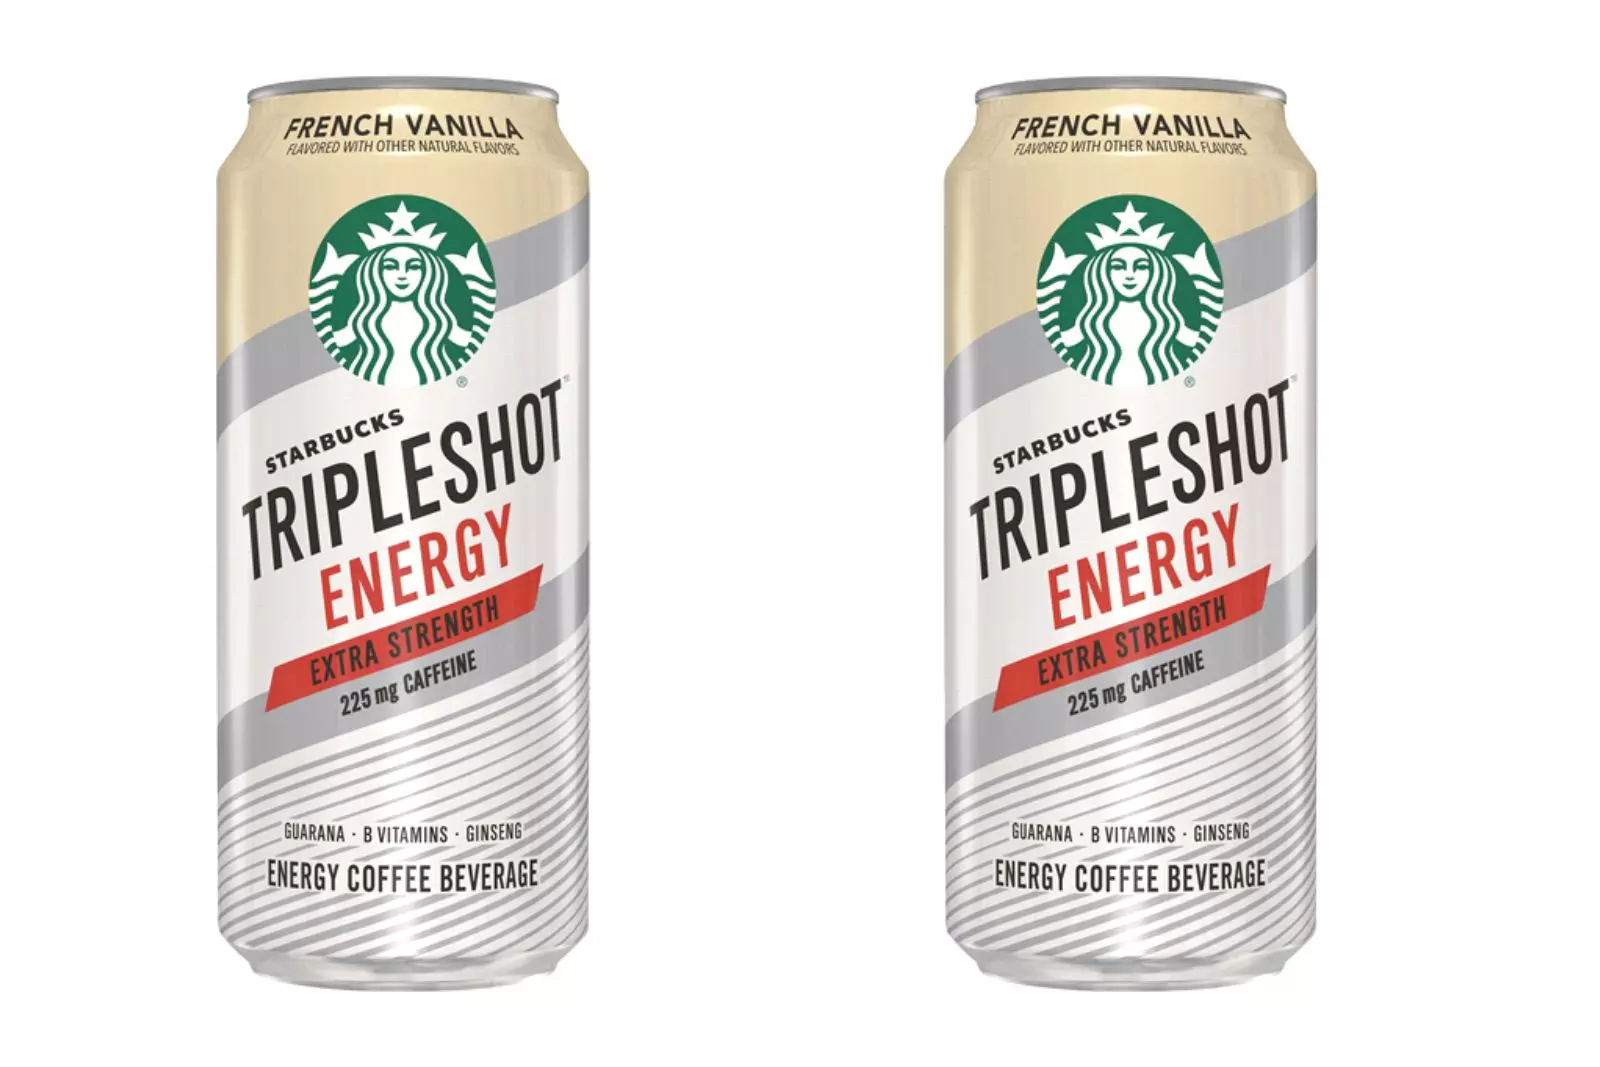 Popular Starbucks Drink Recalled in Illinois and Indiana